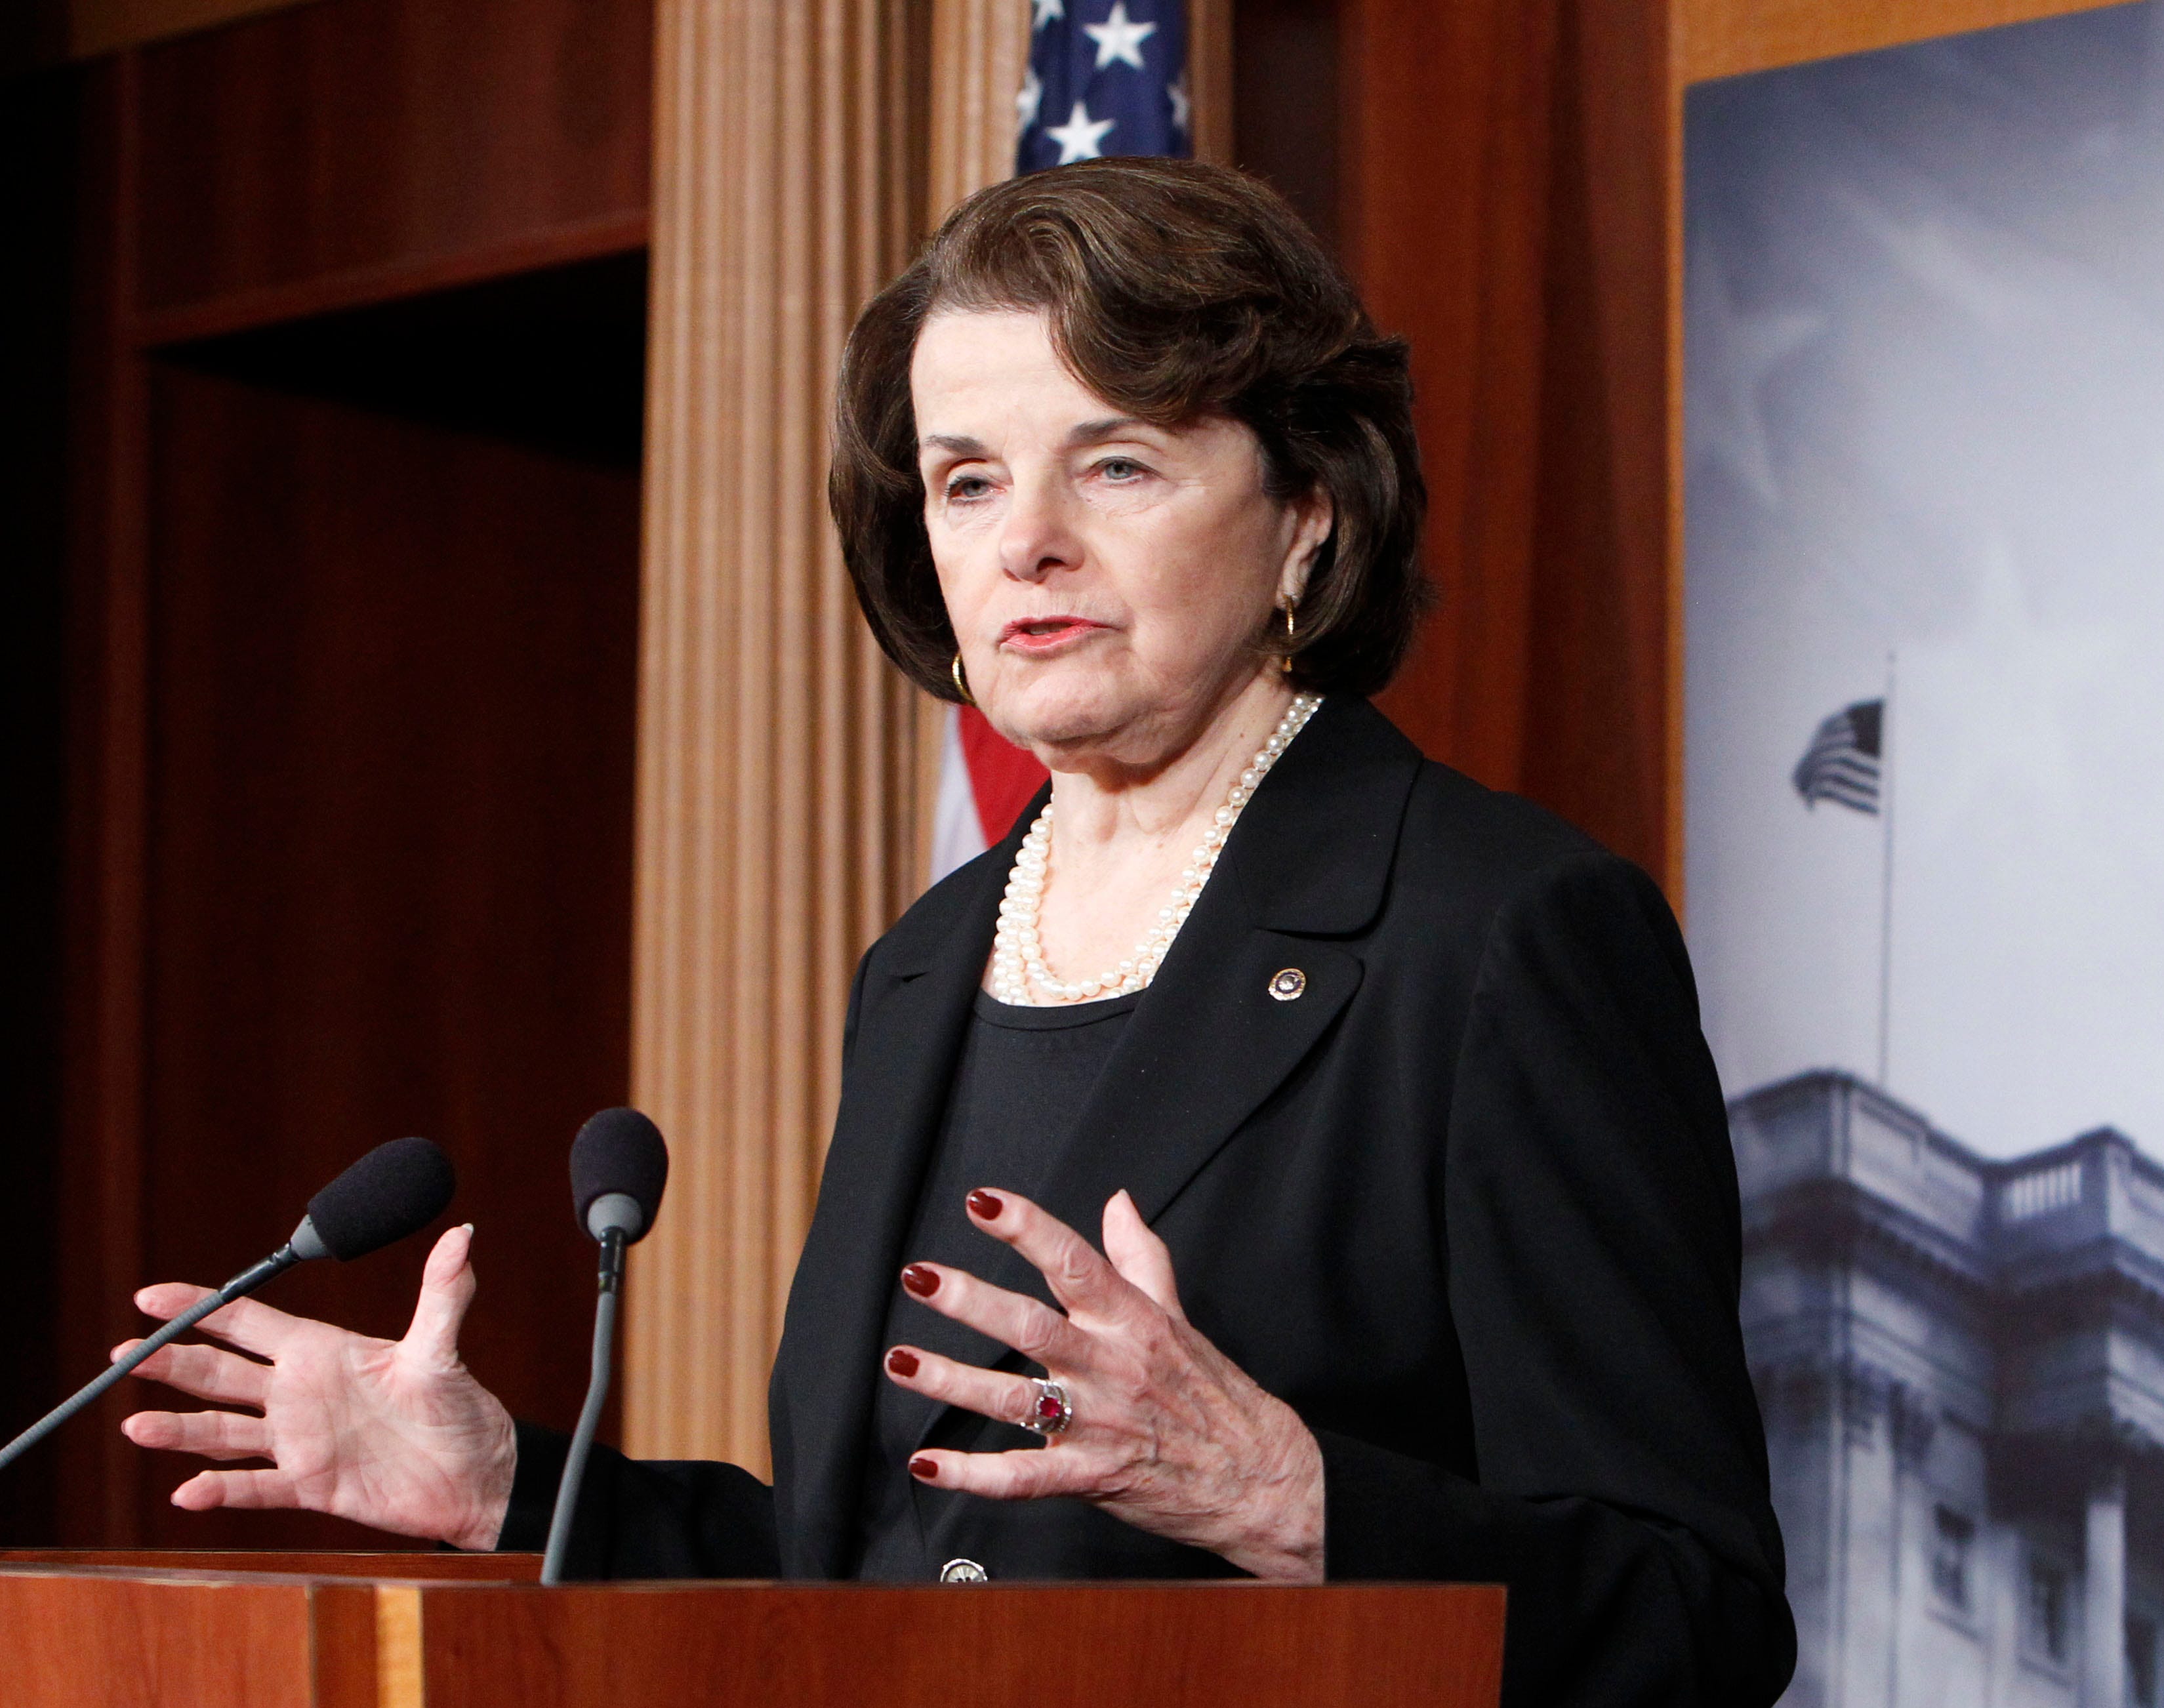 This photo taken Dec. 21, 2012 photo Sen. Diane Feinstein, D-Cal., chair of the Senate Intelligence Committee, speaking at a Capitol Hill news conference in Washington. Sunday in Washington, Aug. 31, 2014, Feinstein said President Barack Obama may be "too cautious" in his approach to dealing with Islamic State militants. Speaking on NBC's "Meet the Press" she said that the Defense and State departments have been putting together a response to the threat, and has seen nothing to compare to the viciousness of the militants who have overrun large portions of Iraq, killed civilians and beheaded American journalist James Foley. Feinstein says the Islamic State group has financing, military structure and weapons unlike any other militants and called them "extraordinarily dangerous."